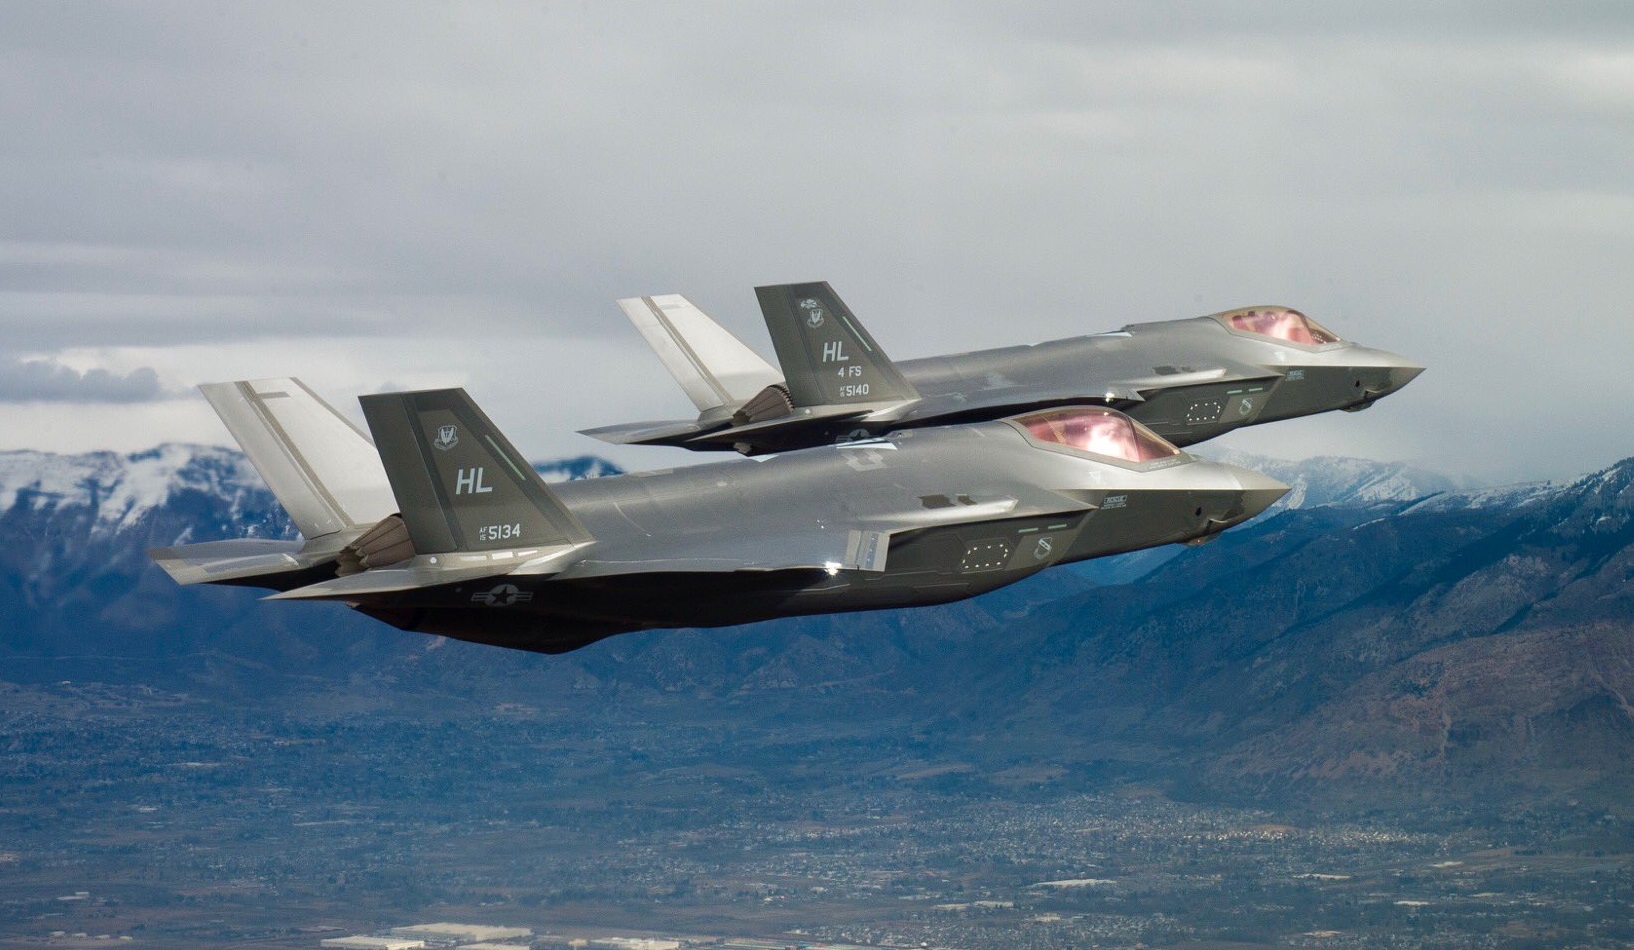 31 Air Force Pilots Explain Why They Love the F-35 Stealth Fighter ...